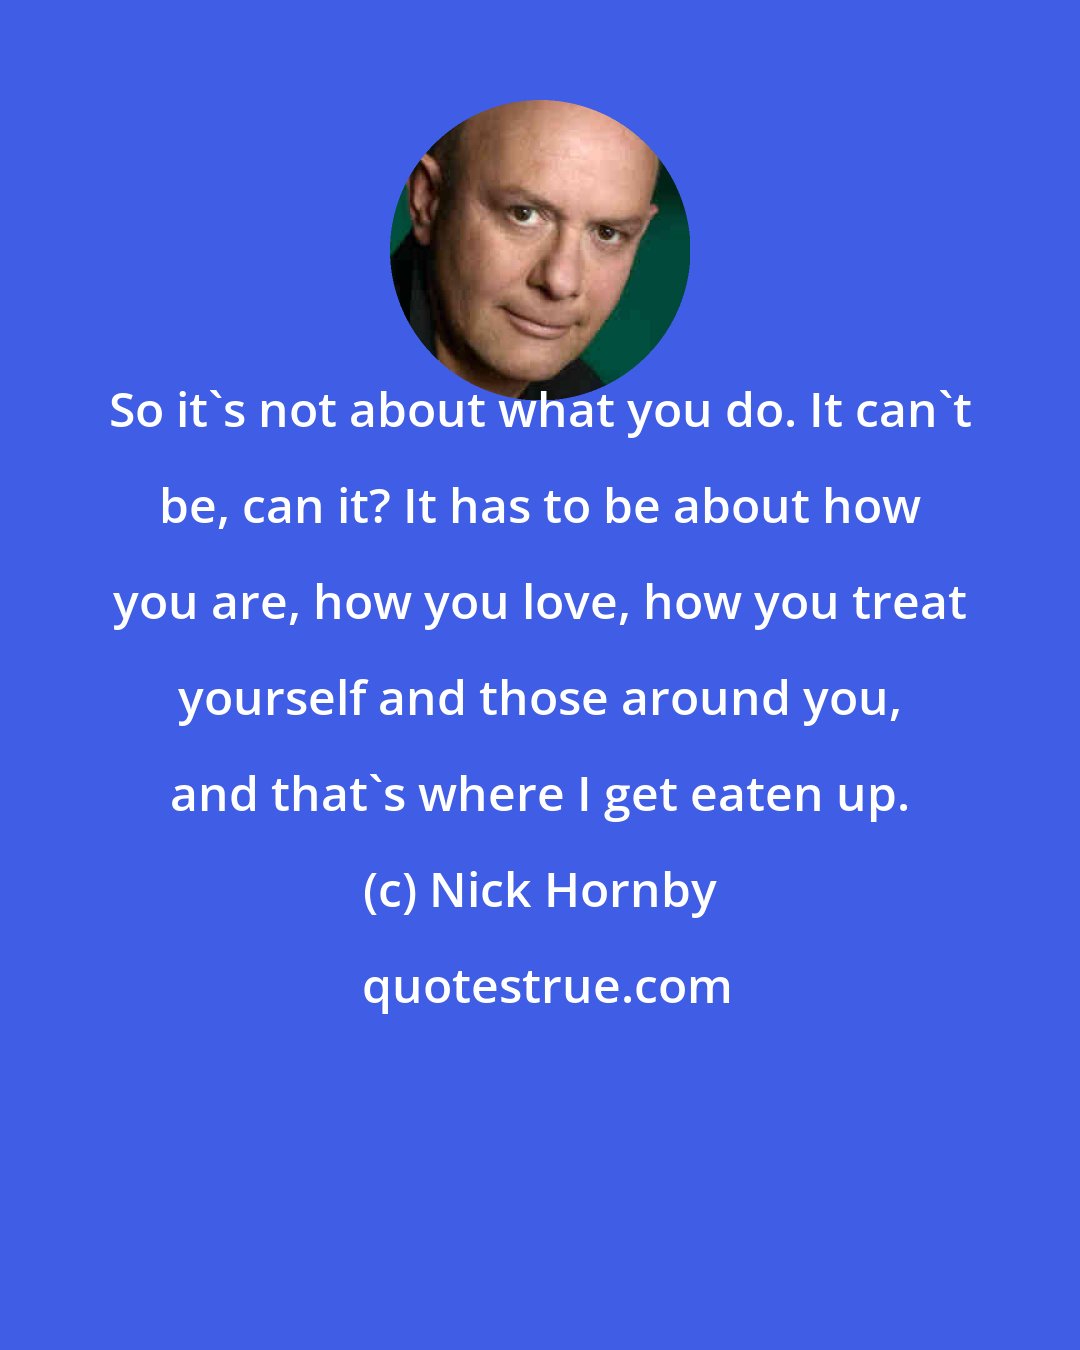 Nick Hornby: So it's not about what you do. It can't be, can it? It has to be about how you are, how you love, how you treat yourself and those around you, and that's where I get eaten up.